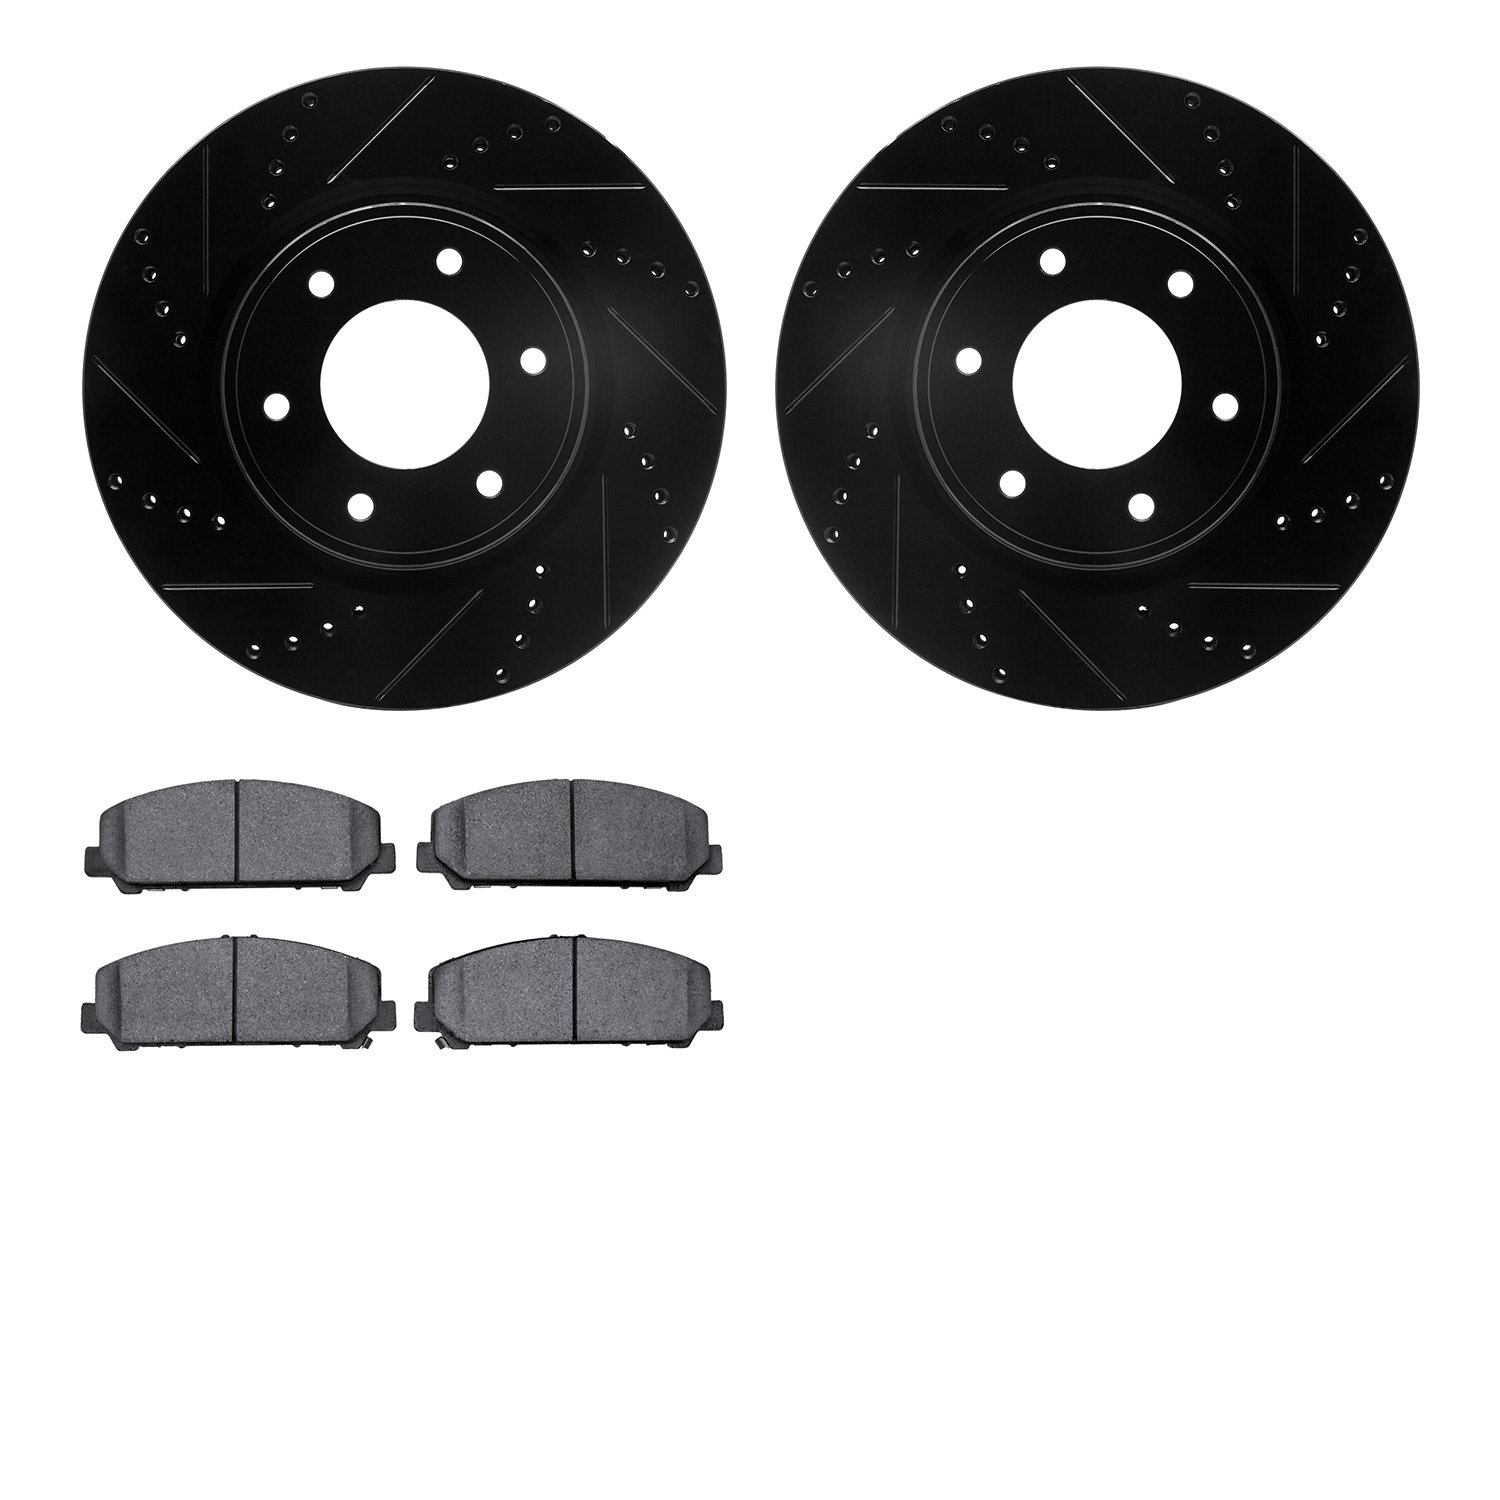 8402-67005 Drilled/Slotted Brake Rotors with Ultimate-Duty Brake Pads Kit [Black], Fits Select Infiniti/Nissan, Position: Front